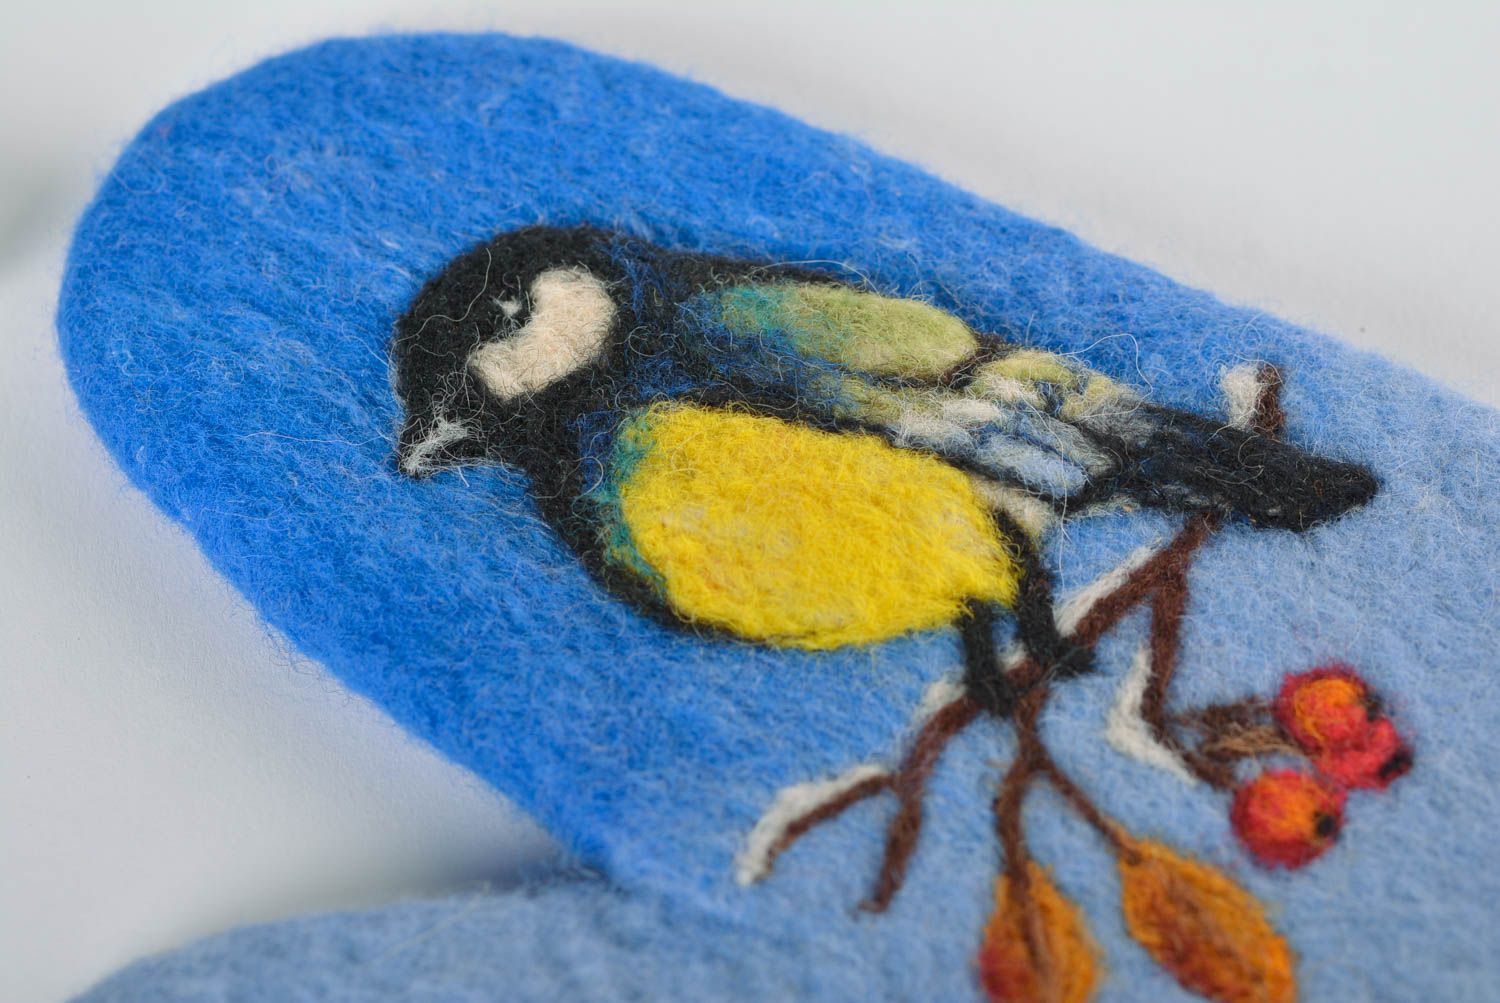 Handmade felted mittens wool knit mittens wool mittens mittens with a bird image photo 4